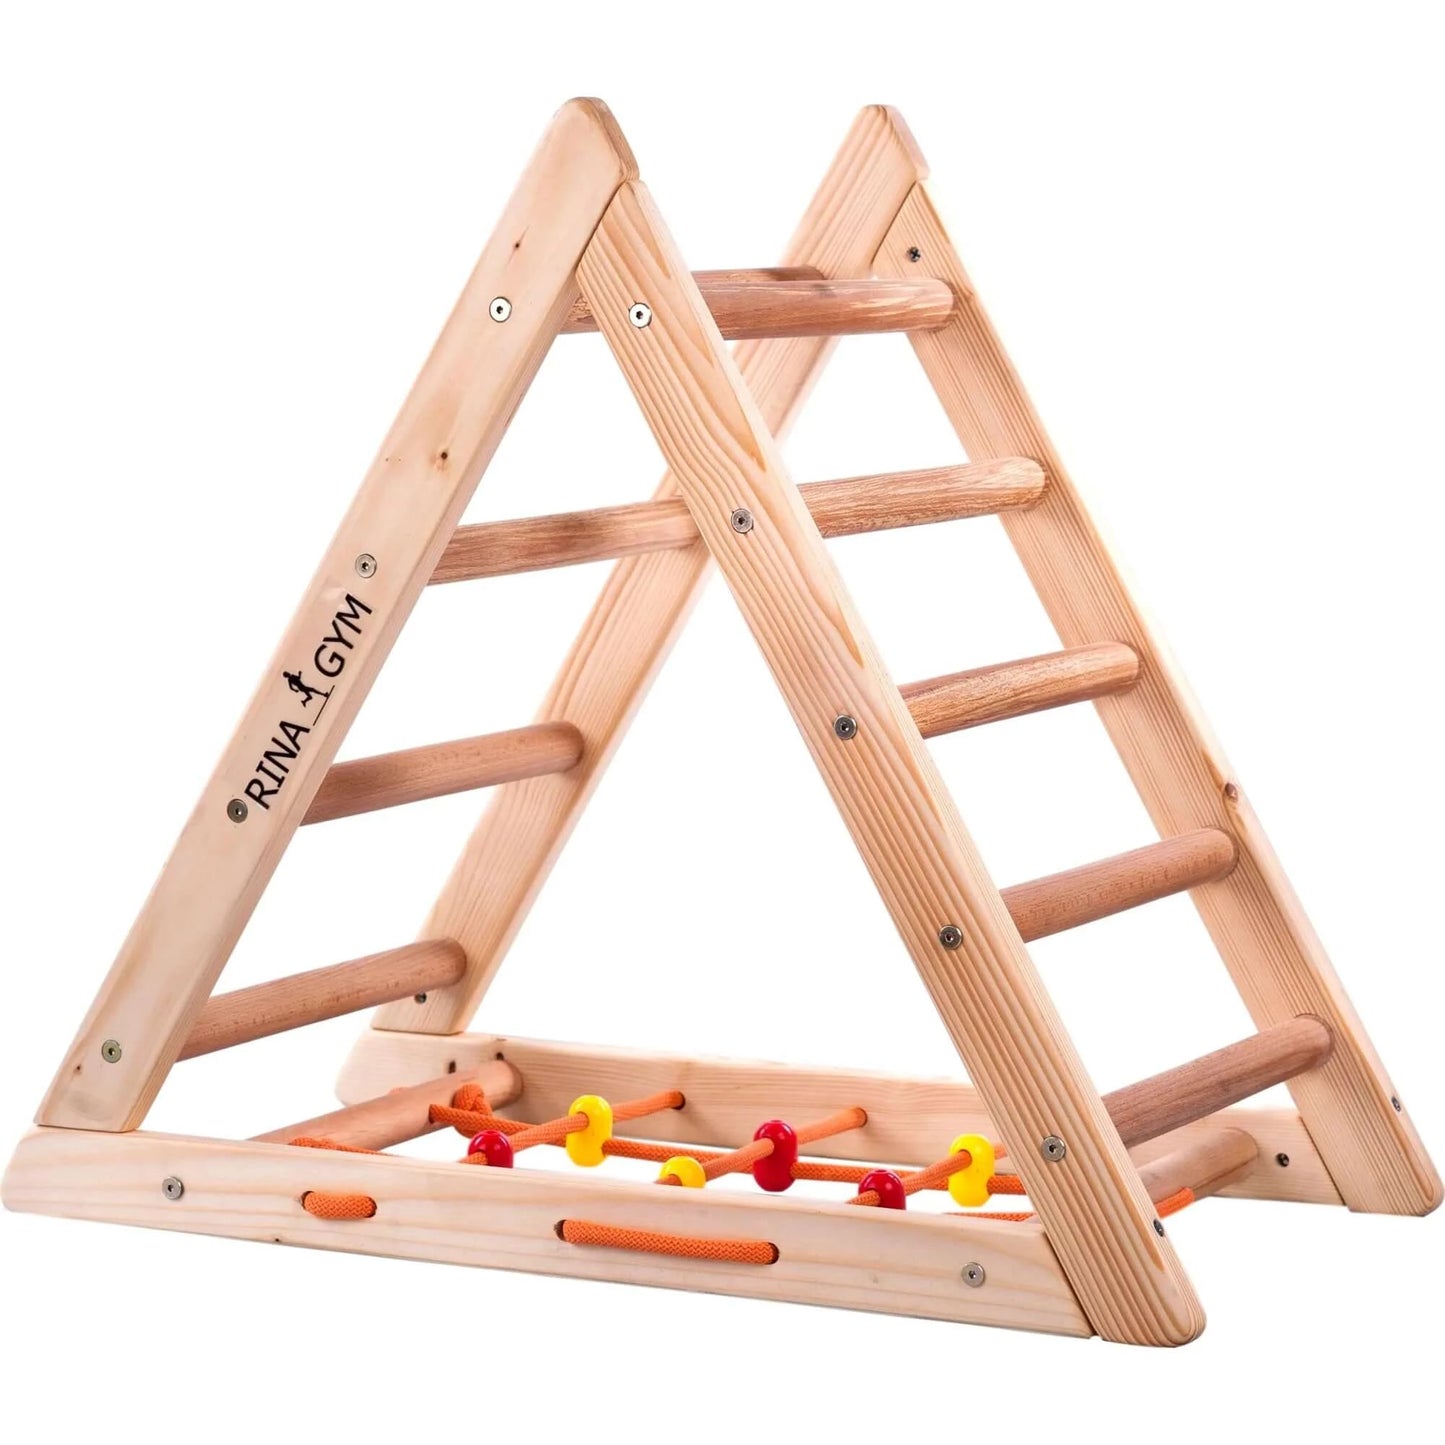 Climbing triangle COMPACT with ladder, climbing net &amp; slide, different colours